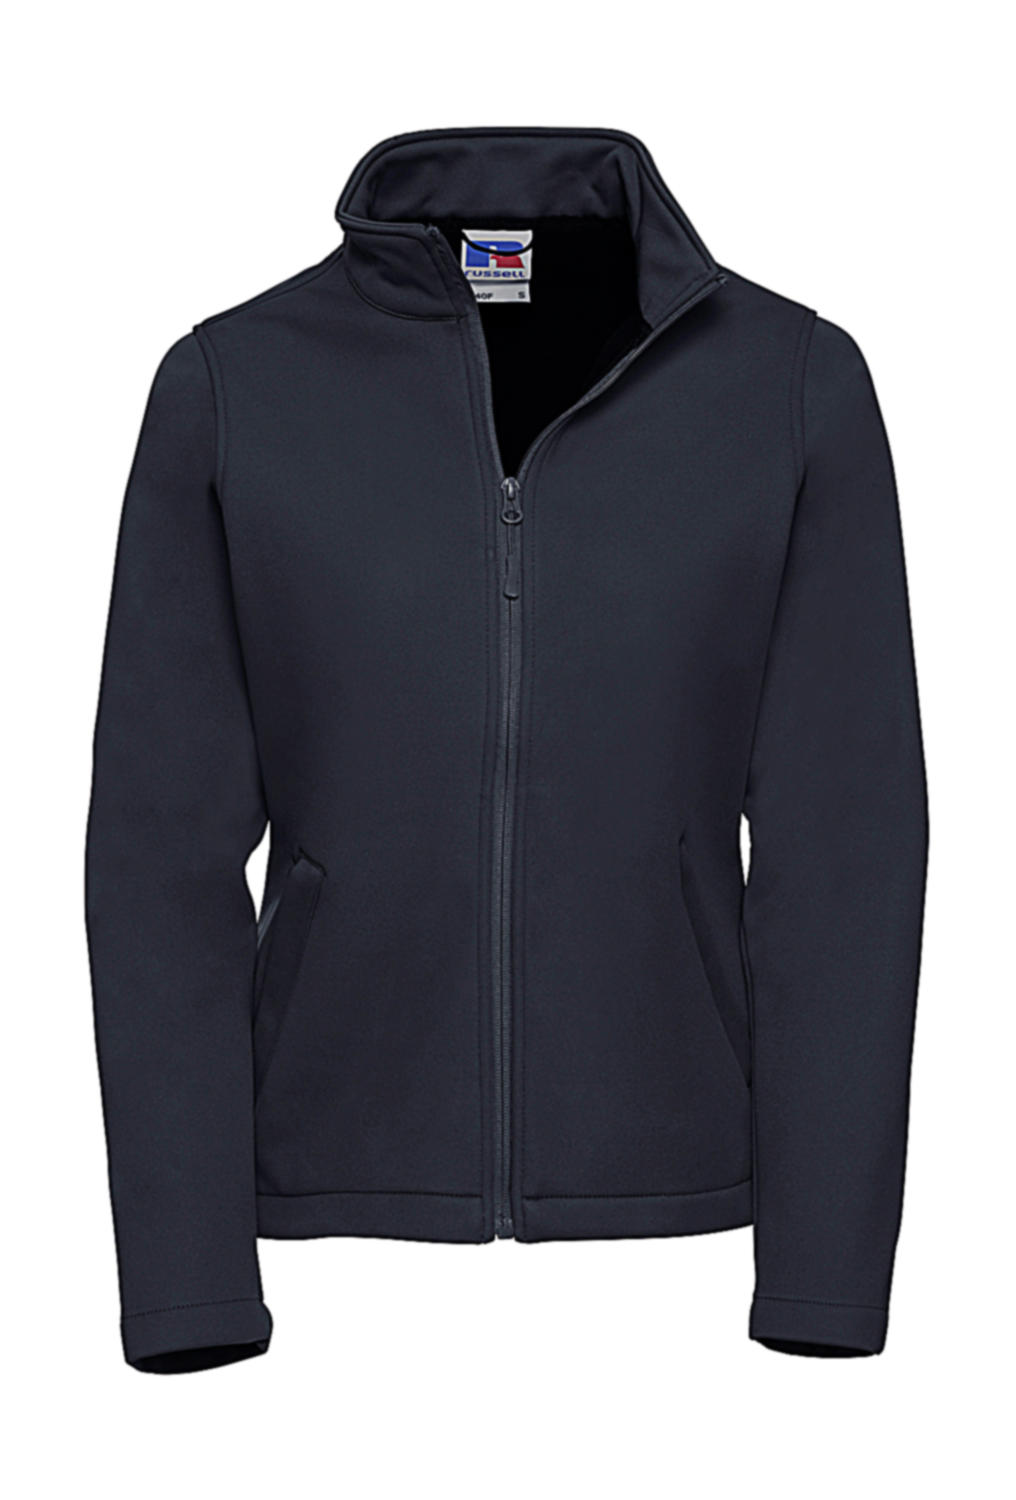  Ladies Smart Softshell Jacket in Farbe French Navy